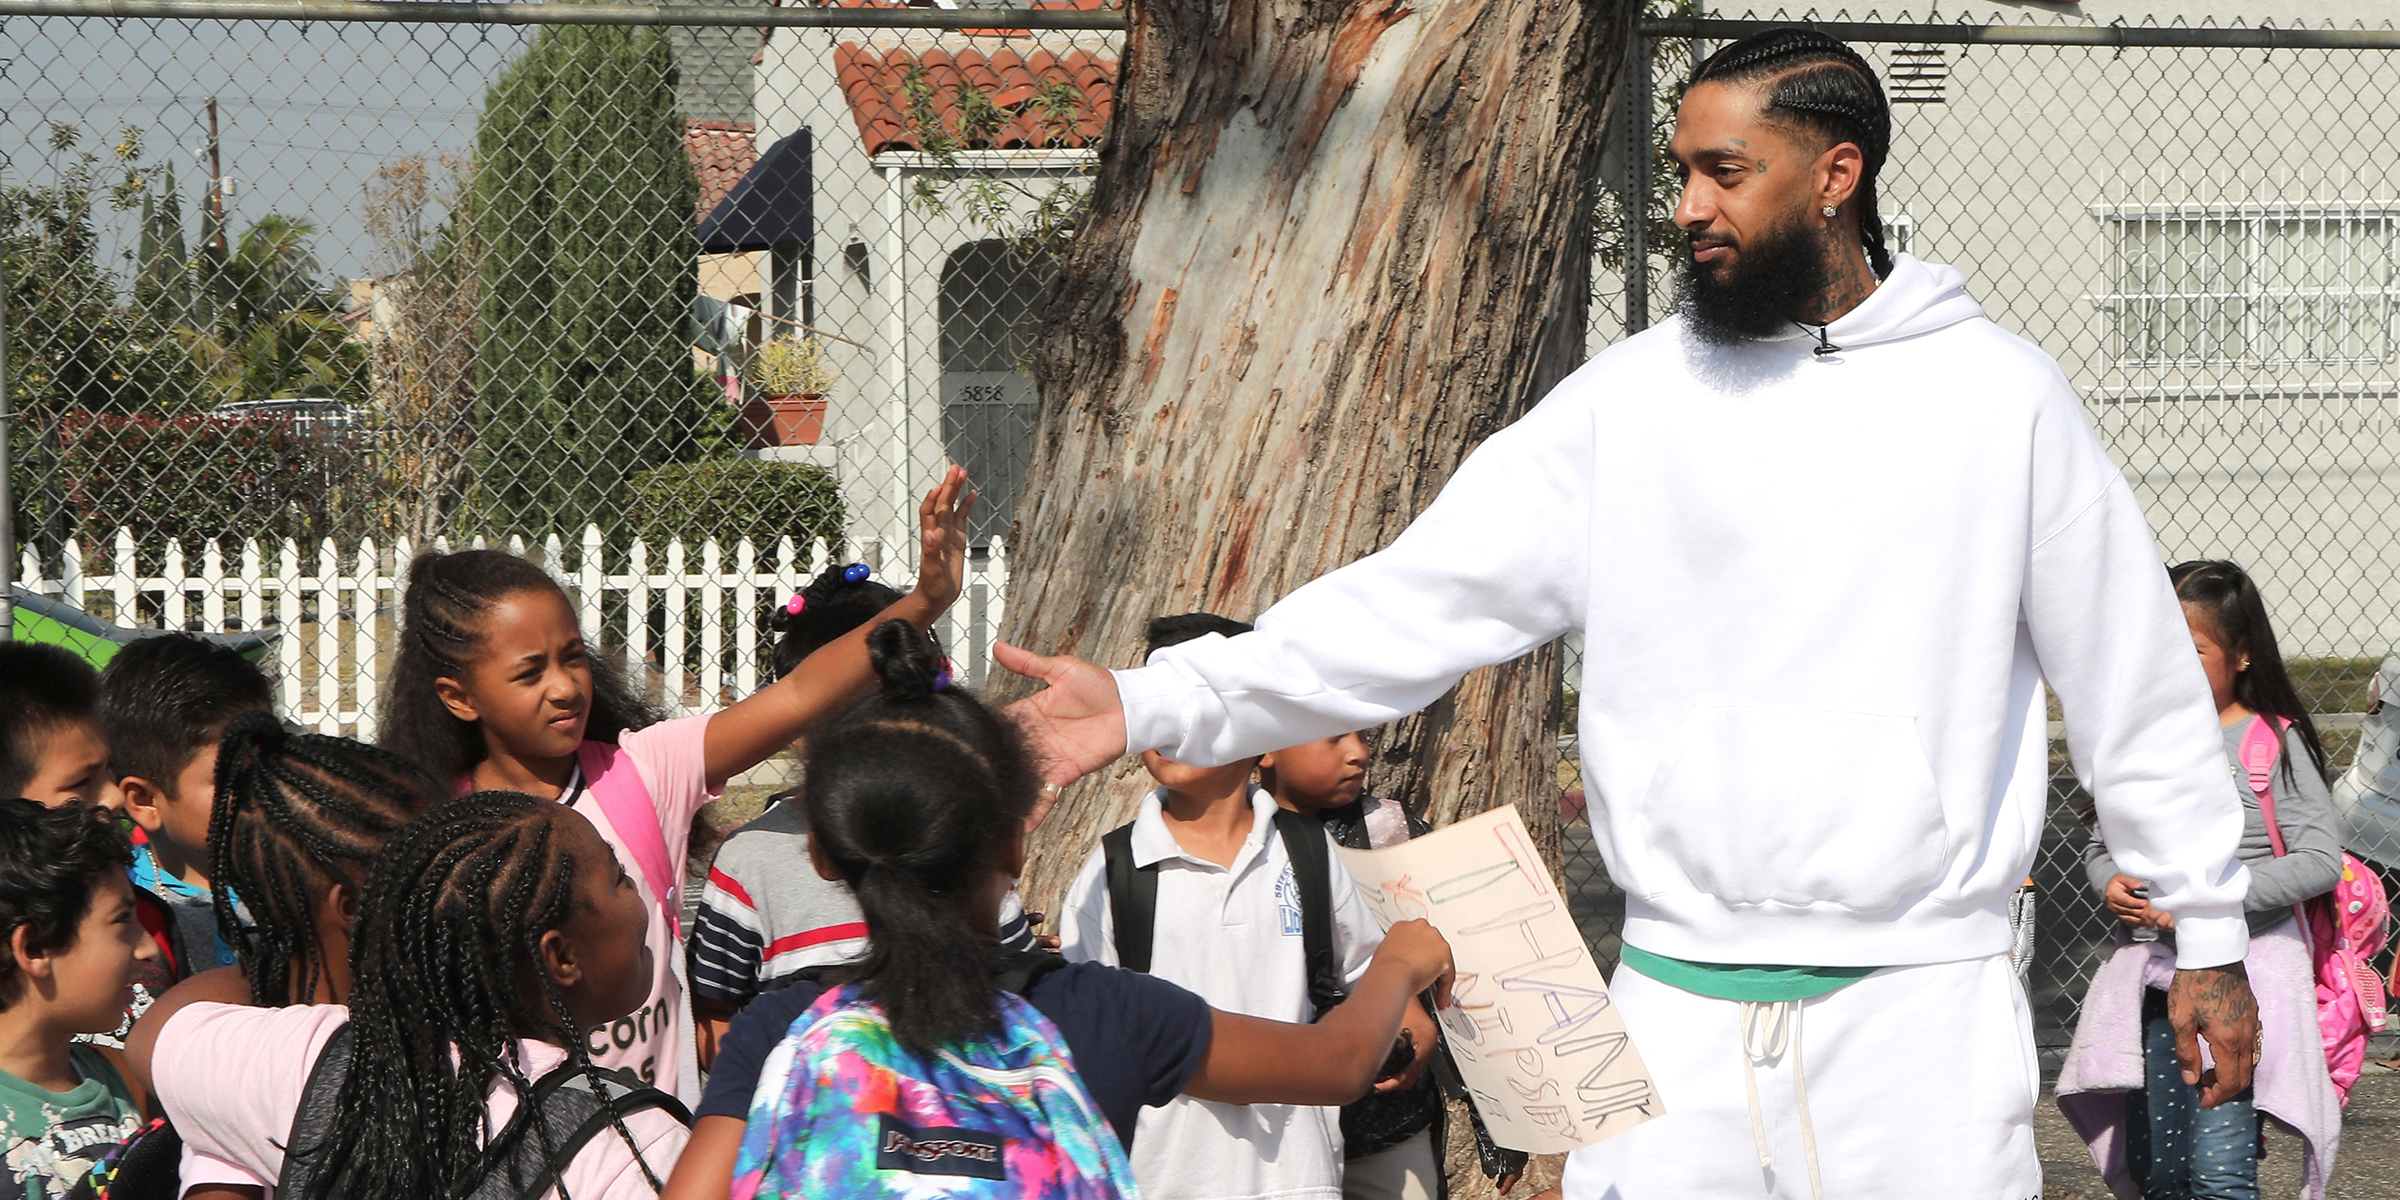 Nipsey Hussle's Foundation to Join L.A. Marathon as Charity Partner